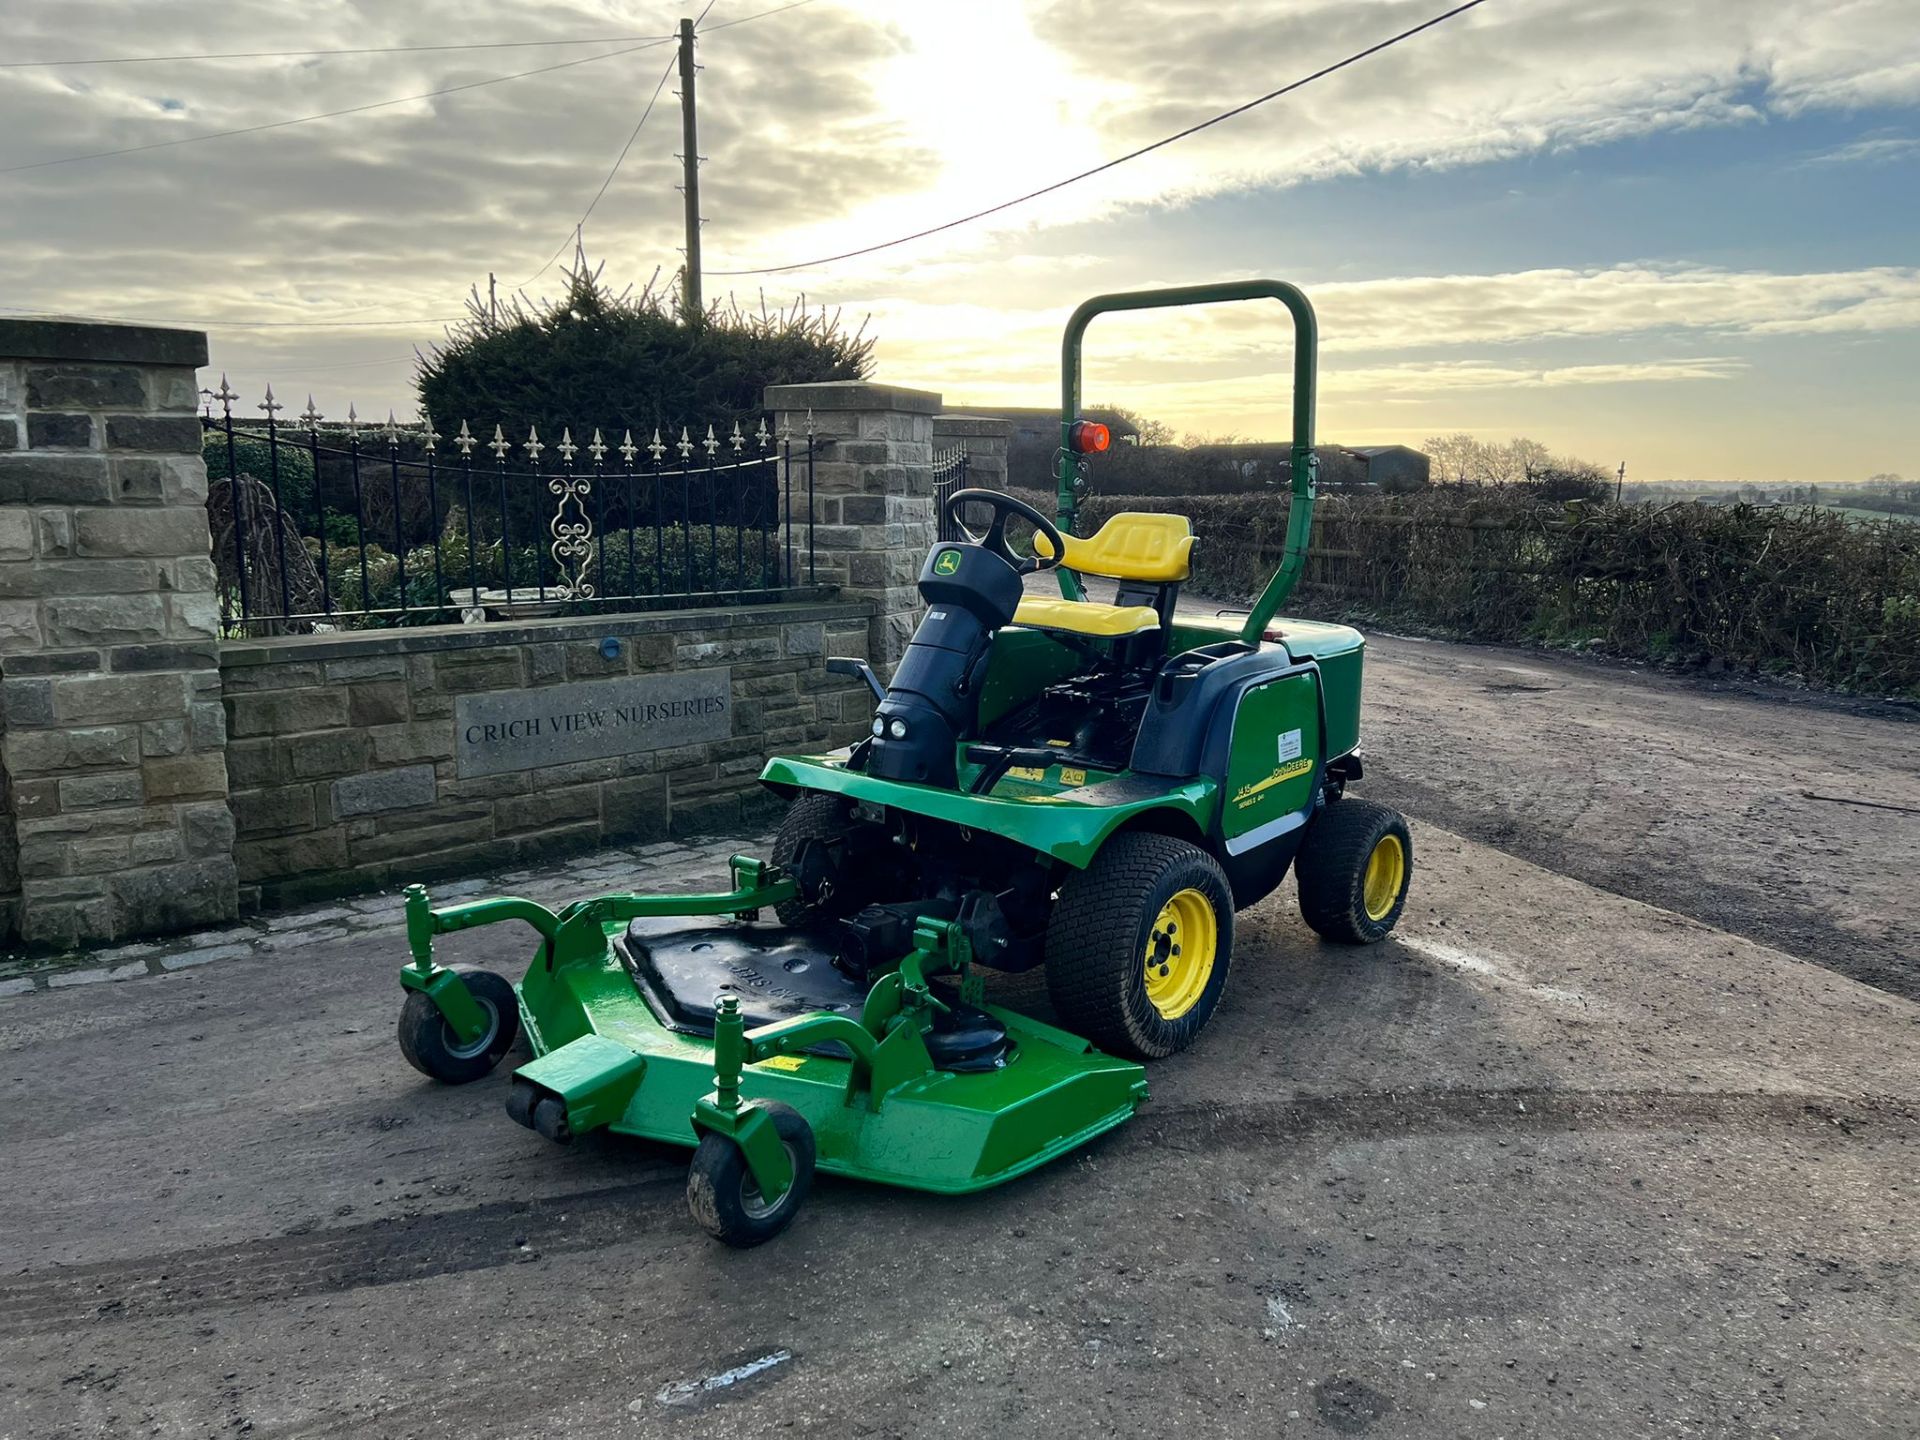 2014 JOHN DEERE 1445 4WD RIDE ON MOWER, RUNS DRIVES AND CUTS, SHOWING A LOW 2956 HOURS *PLUS VAT* - Image 2 of 10